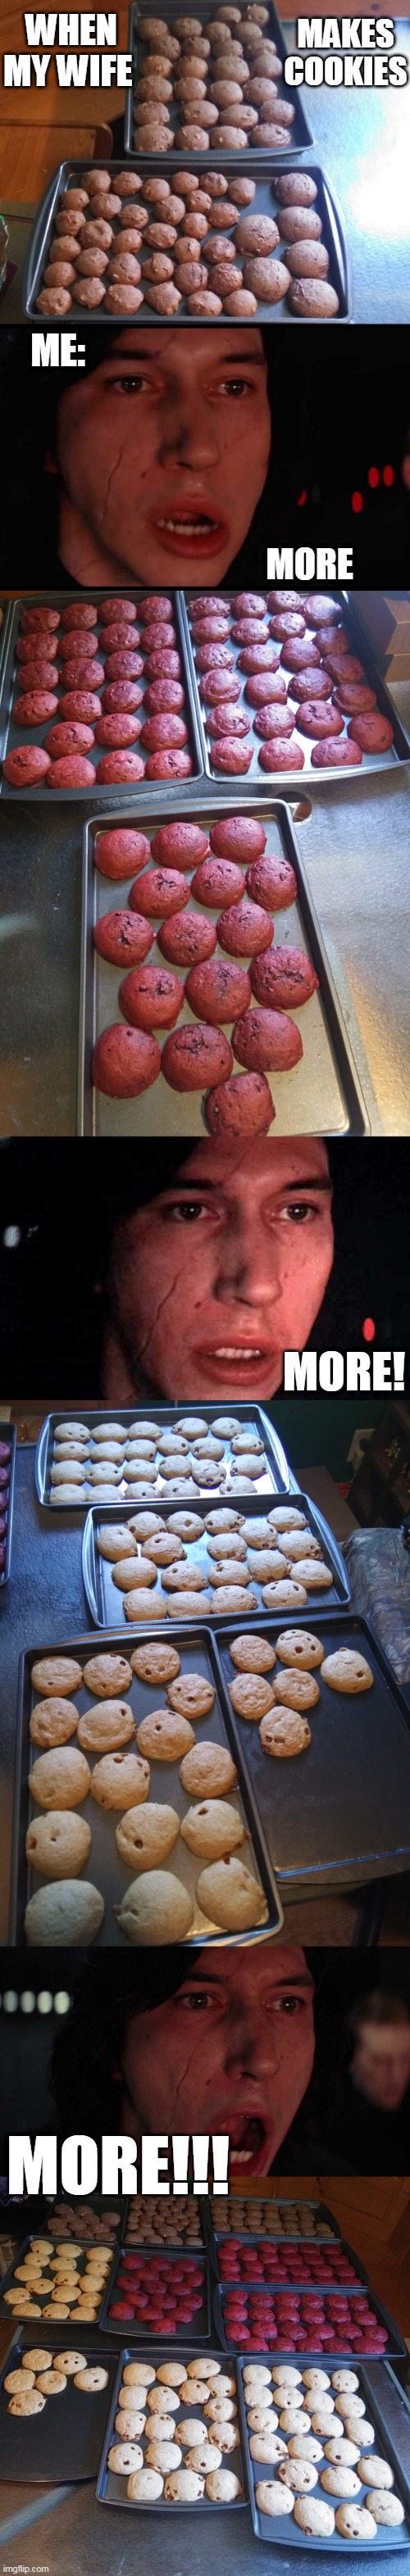 STILL NOT ENOUGH |  MAKES COOKIES; WHEN MY WIFE; ME:; MORE; MORE! MORE!!! | image tagged in memes,kylo ren,more,cookies,star wars | made w/ Imgflip meme maker